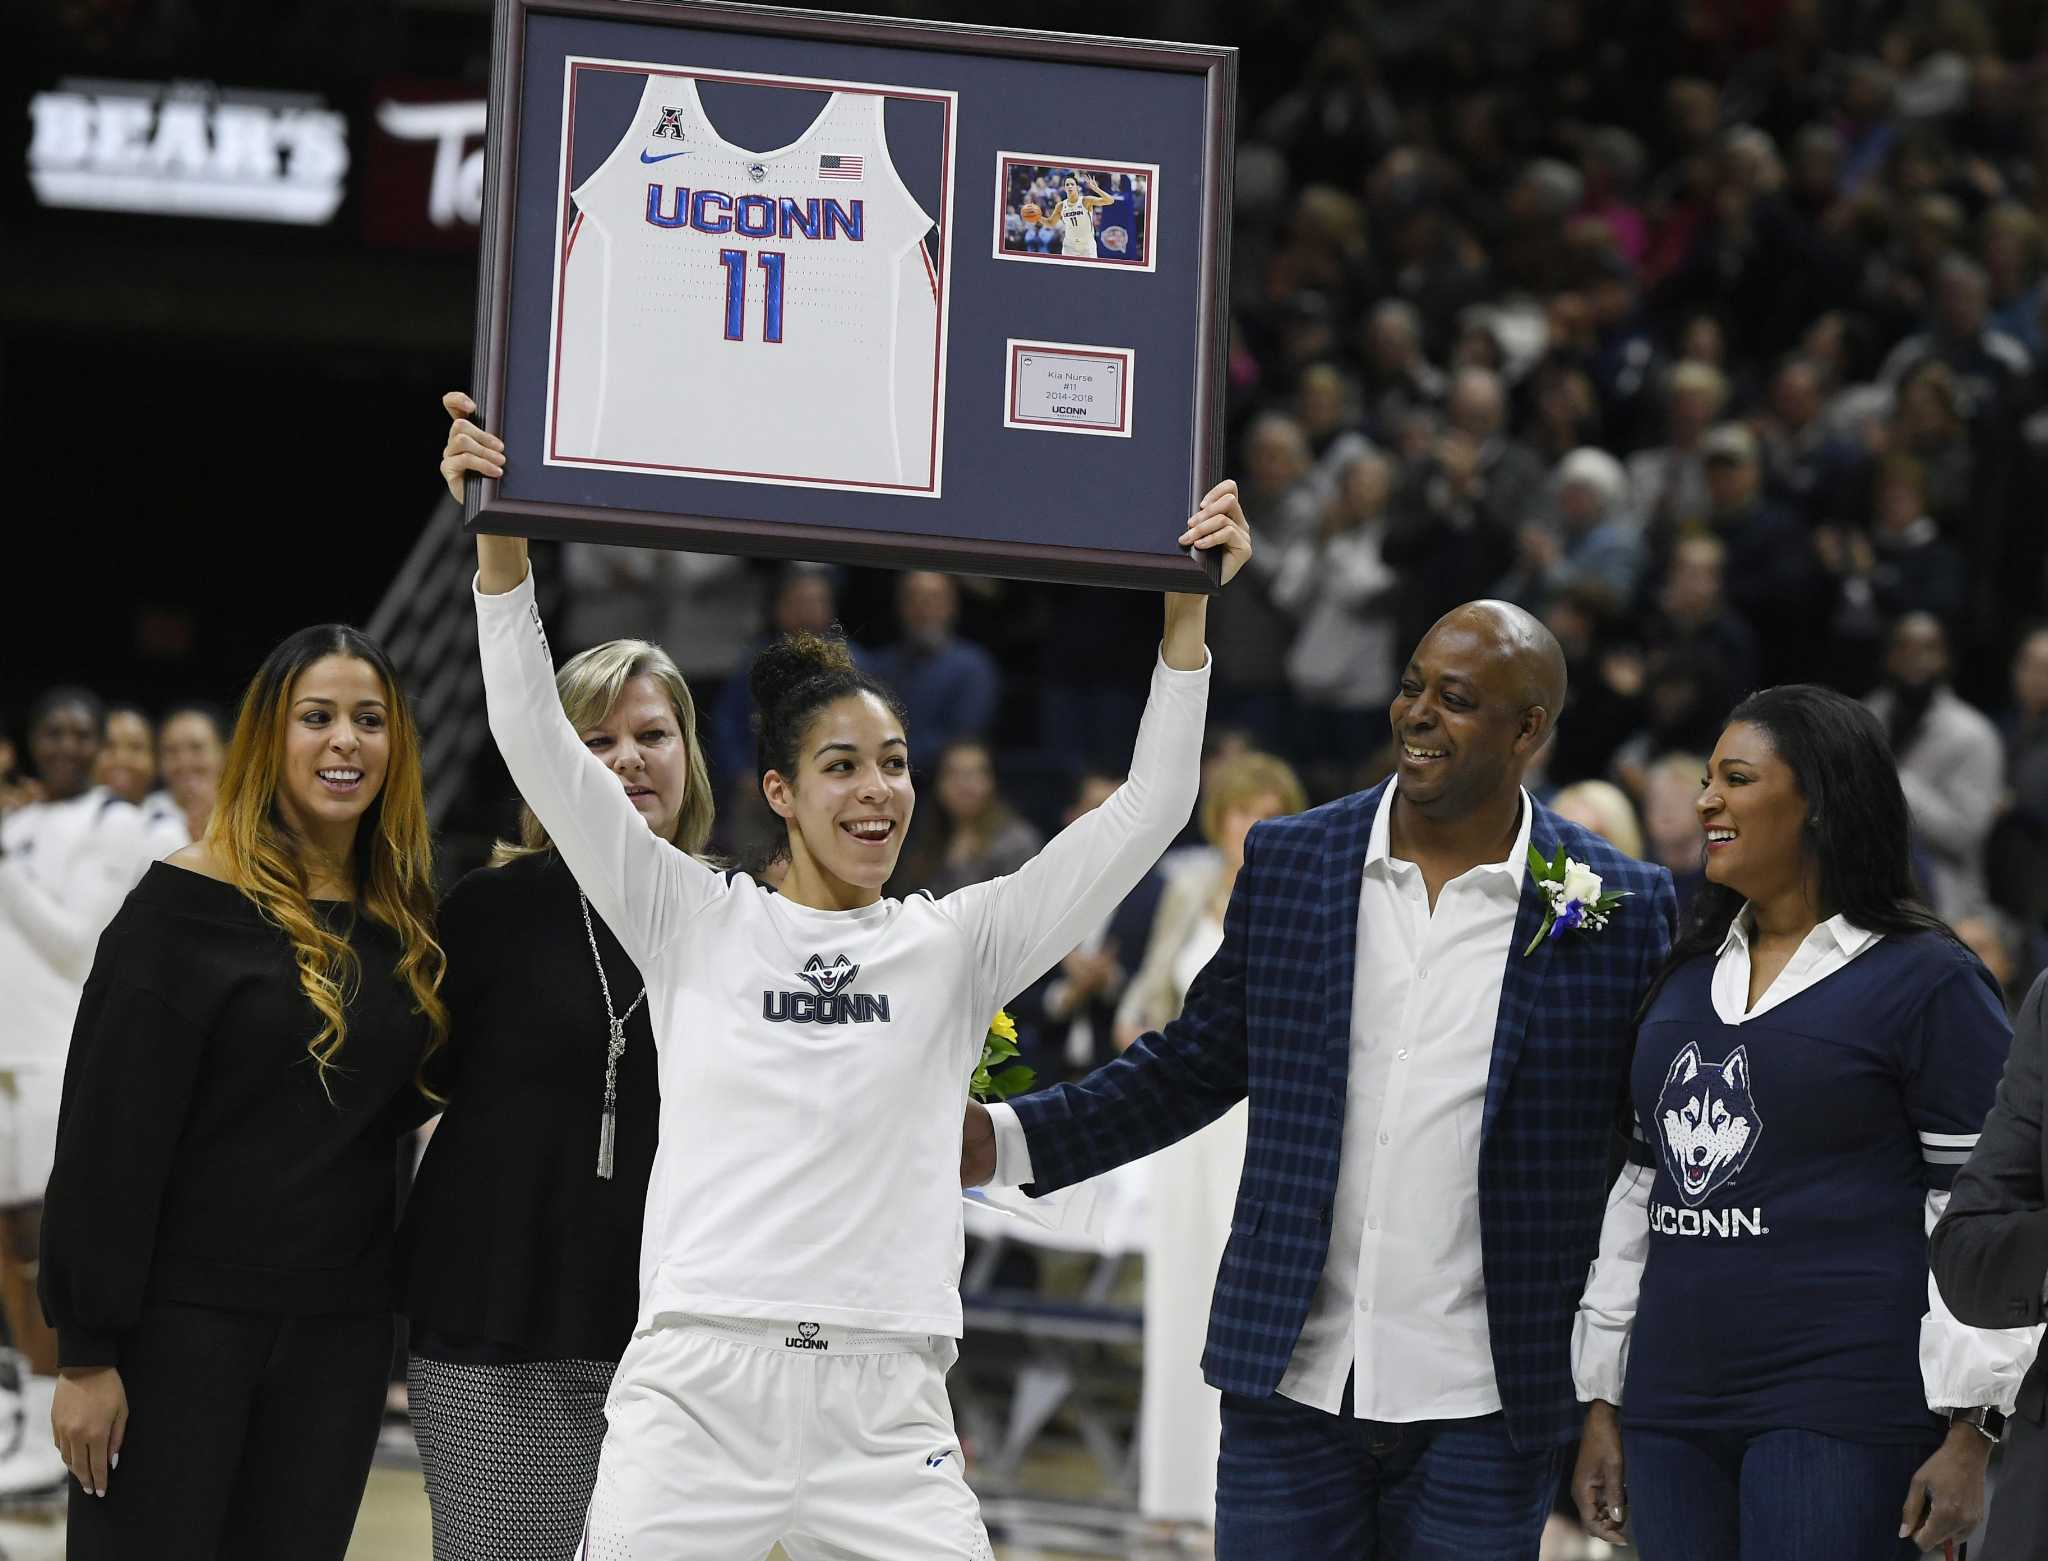 Jeff Jacobs: 2 different paths lead to 1 special Senior Night for UConn’s Nurse, Williams